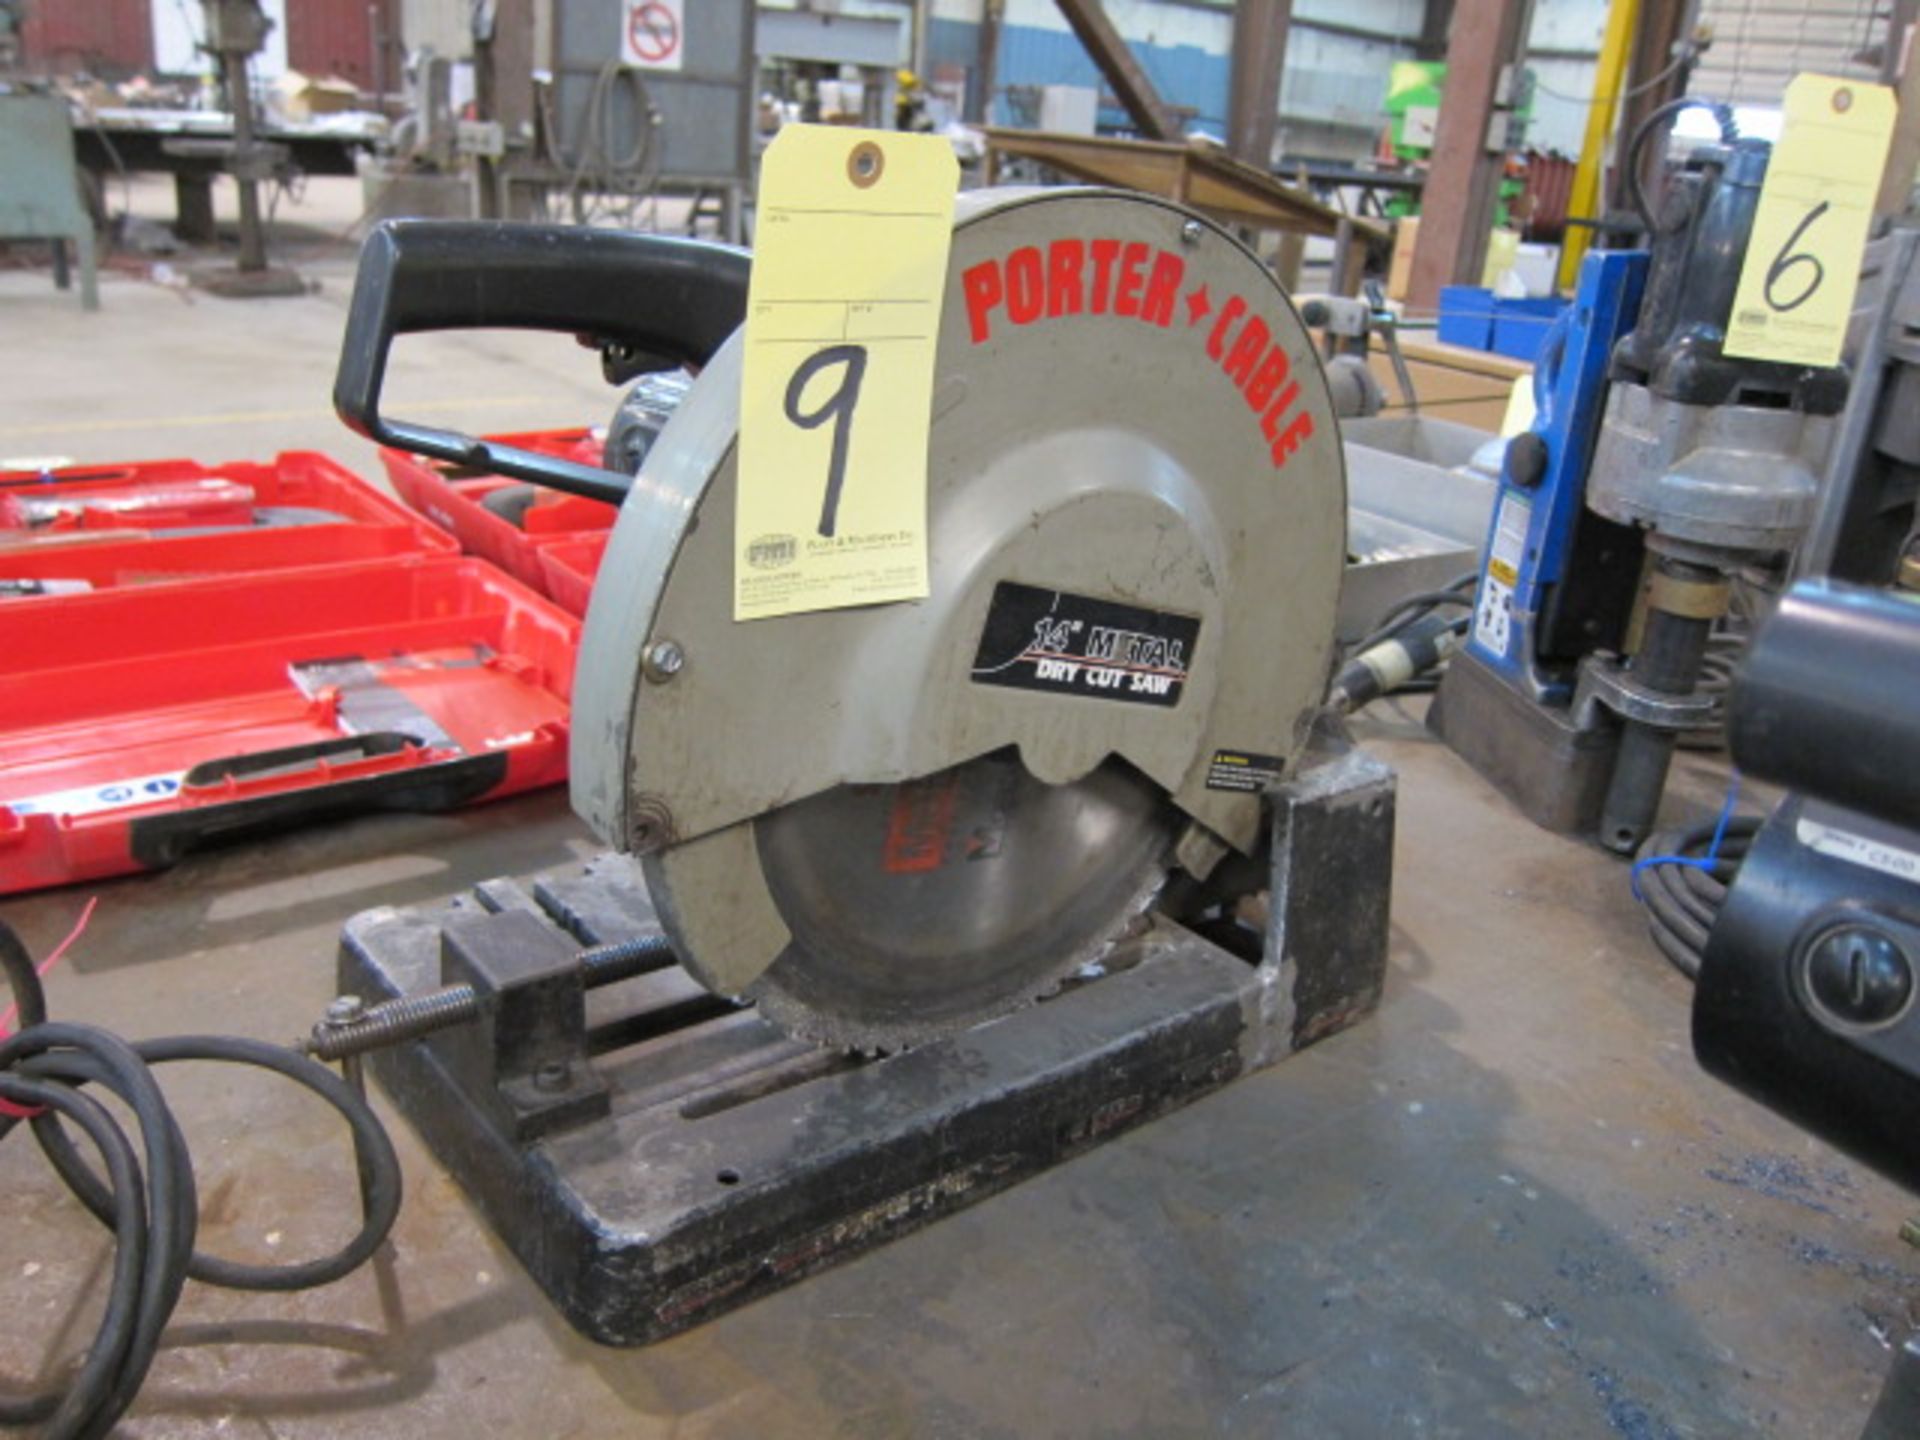 METAL DRY CUT SAW, PORTA-CABLE 14"